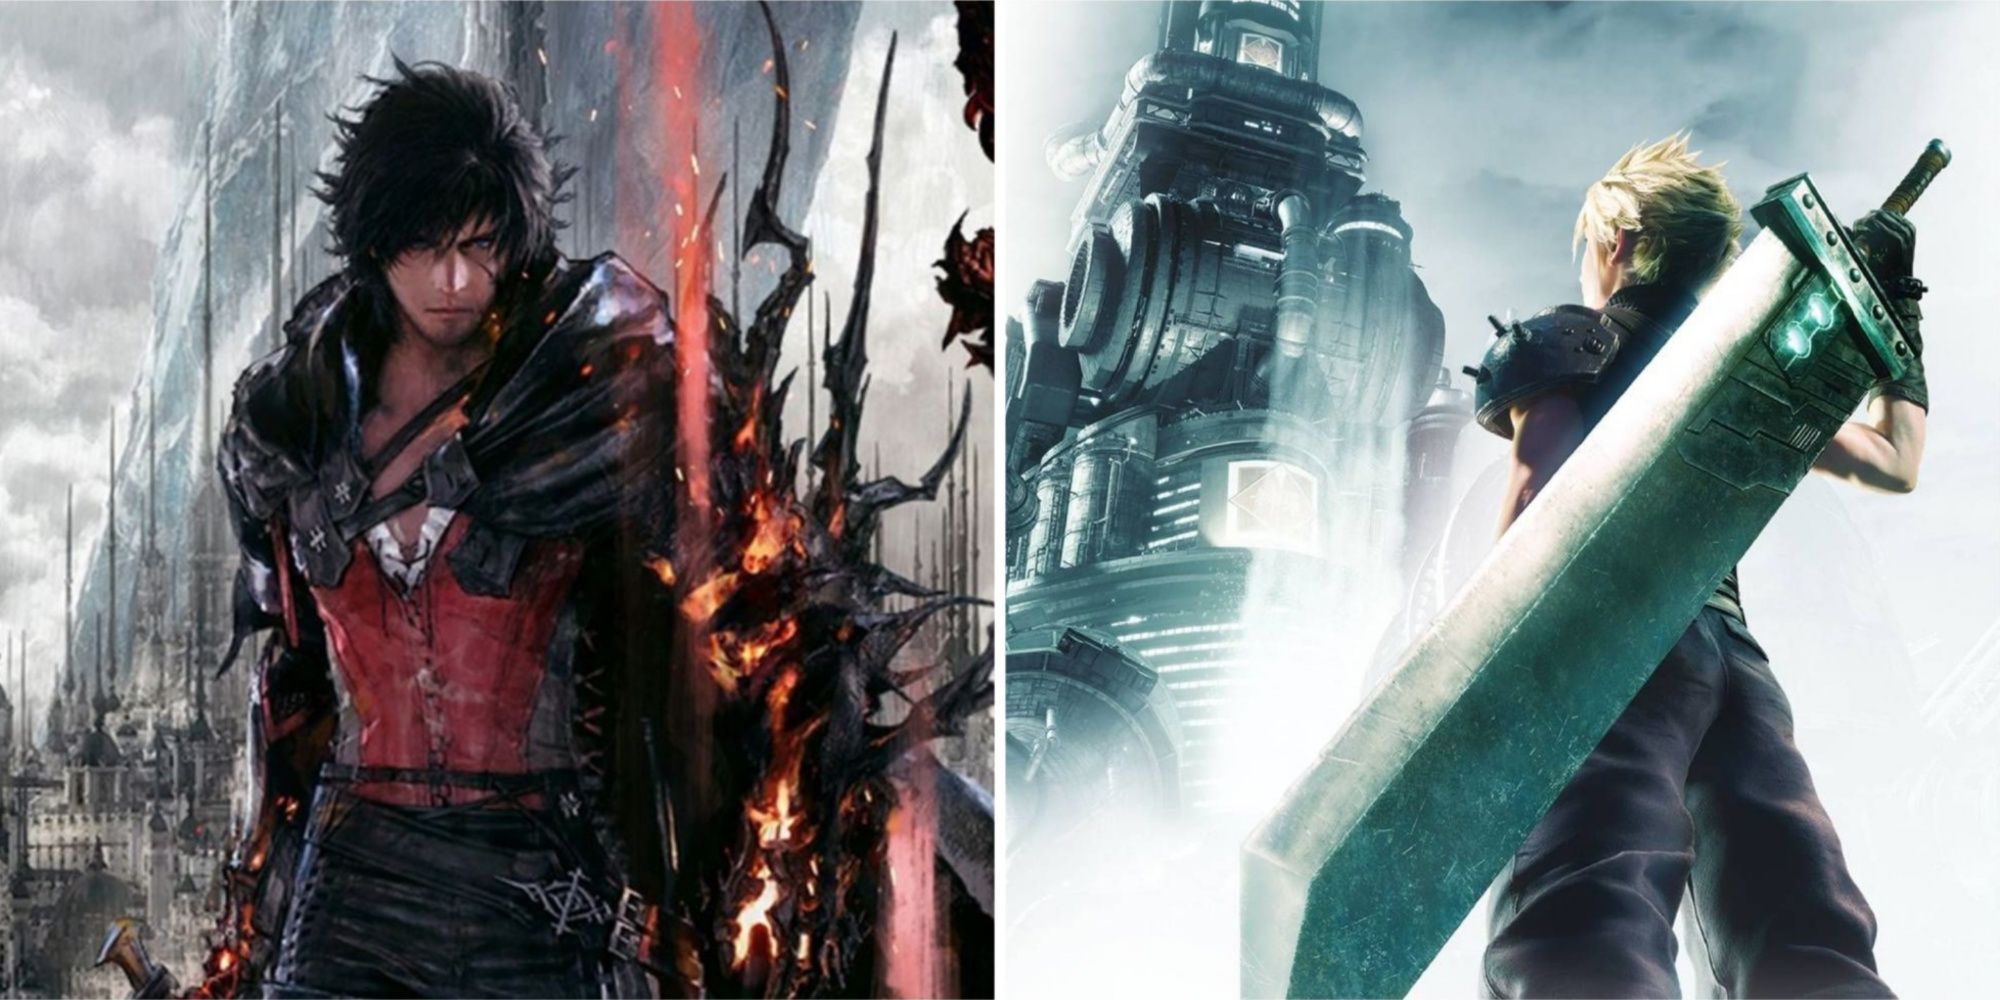 Final Fantasy 16 or Final Fantasy 7 Remake Which Is Better collage - Clive on left, Cloud on right